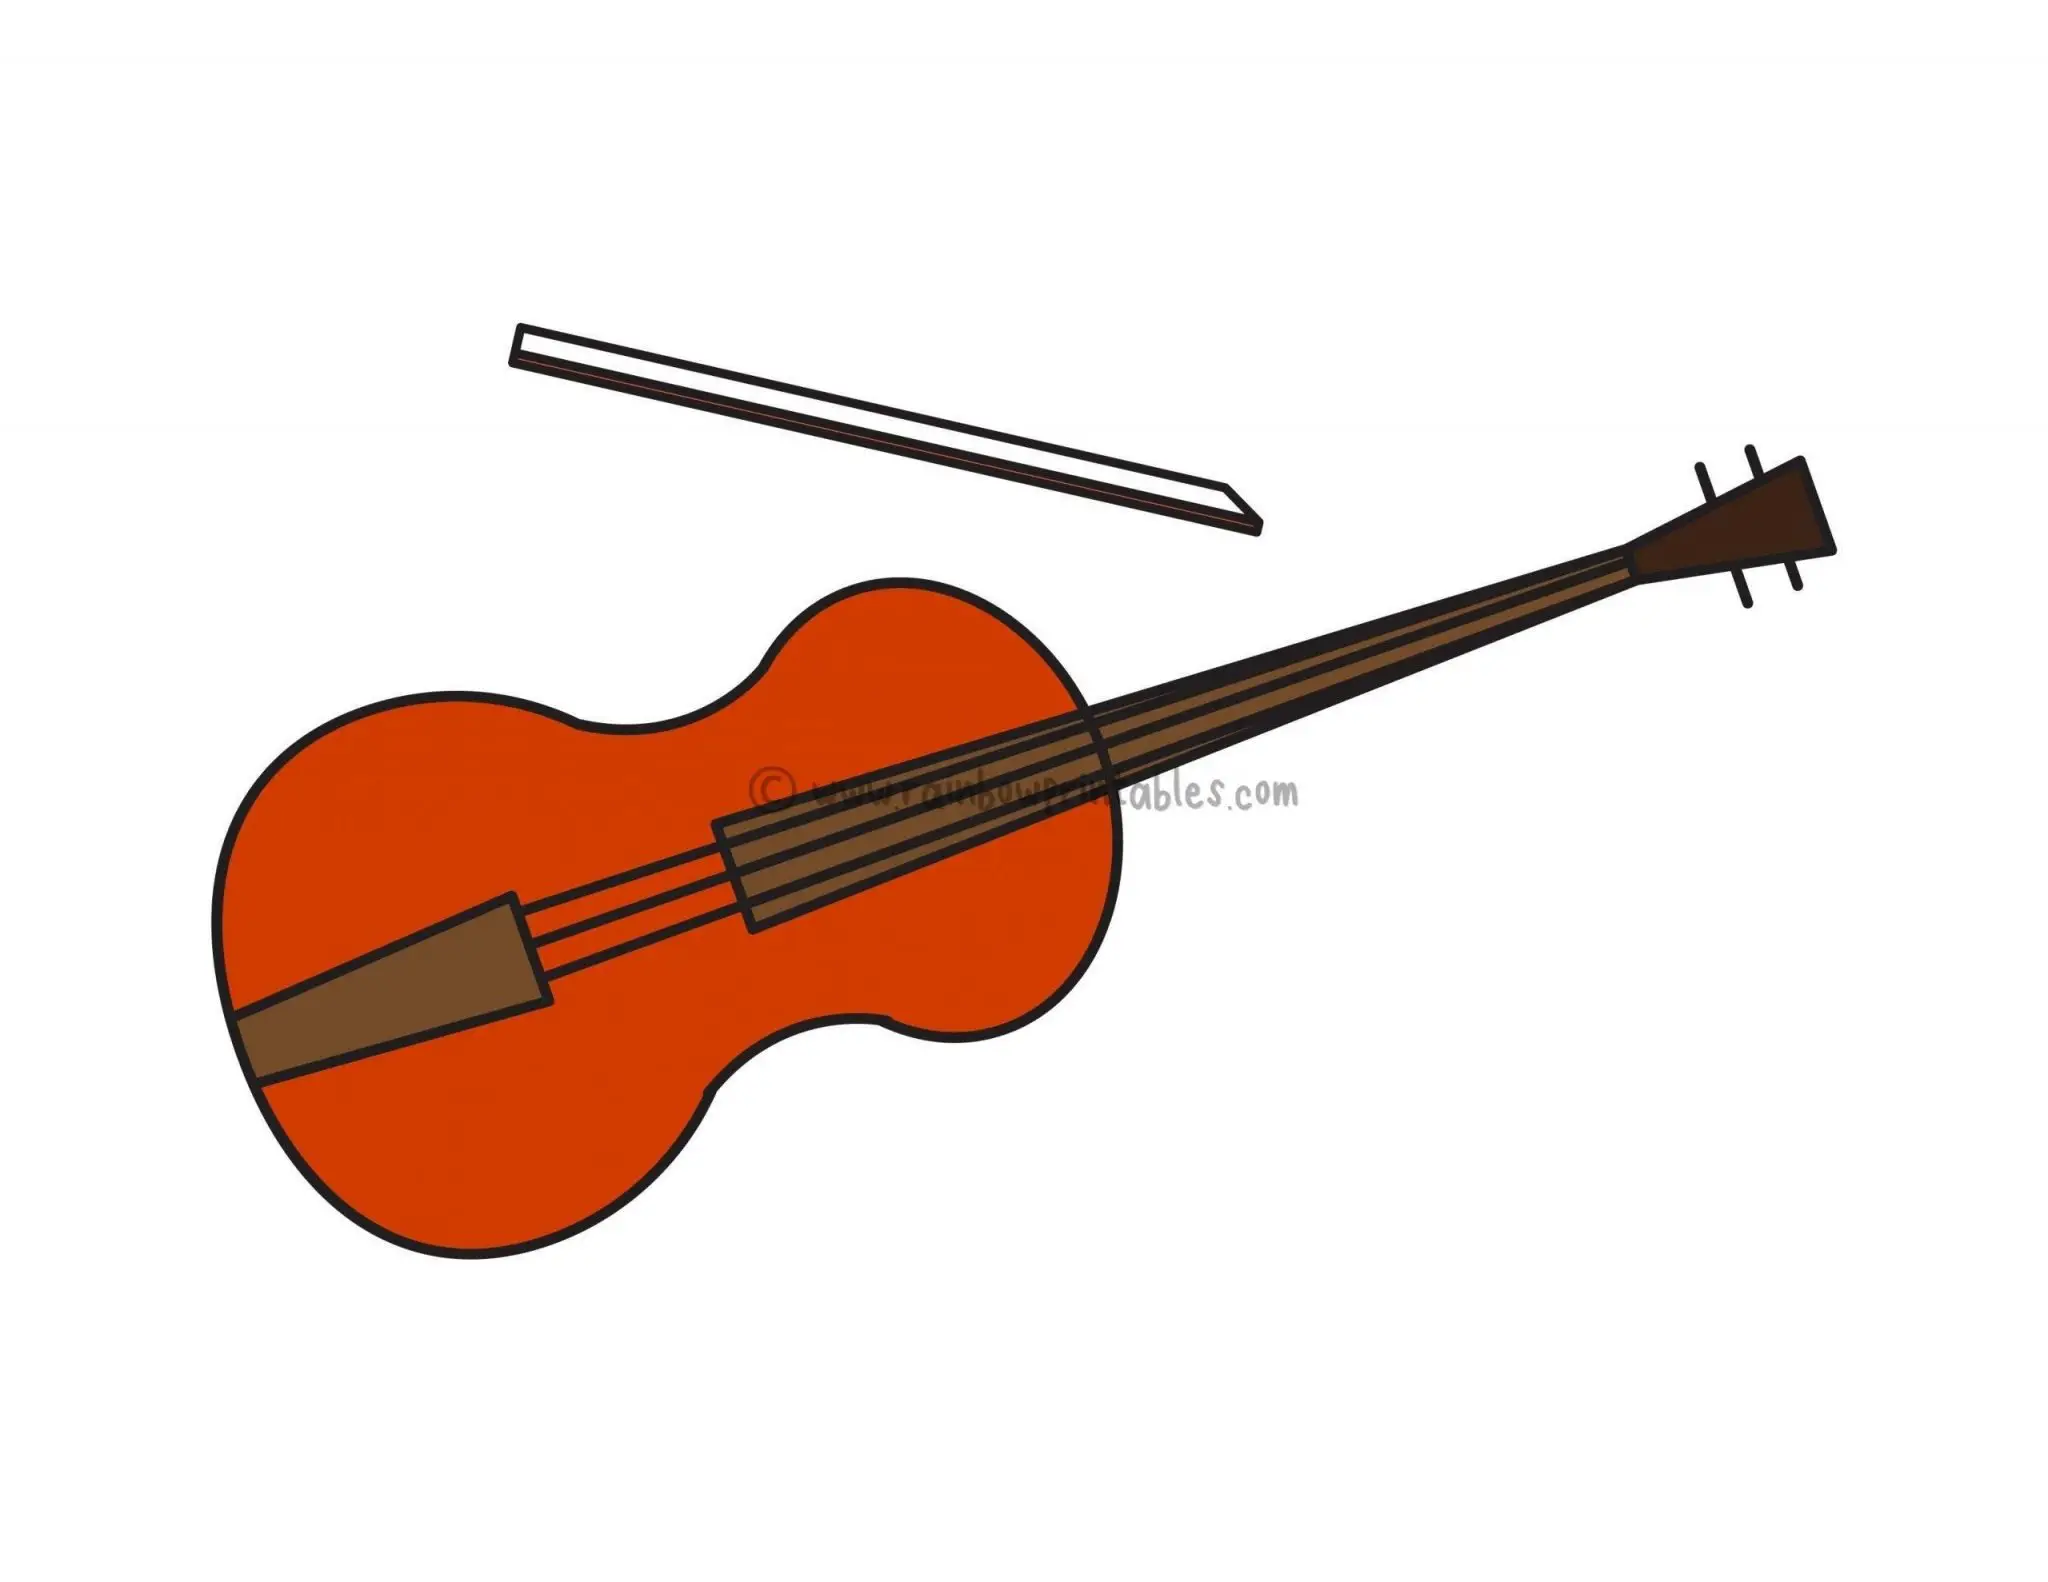 How To Draw a Violin / Fiddle (Musical Instrument) Easy Peasy For